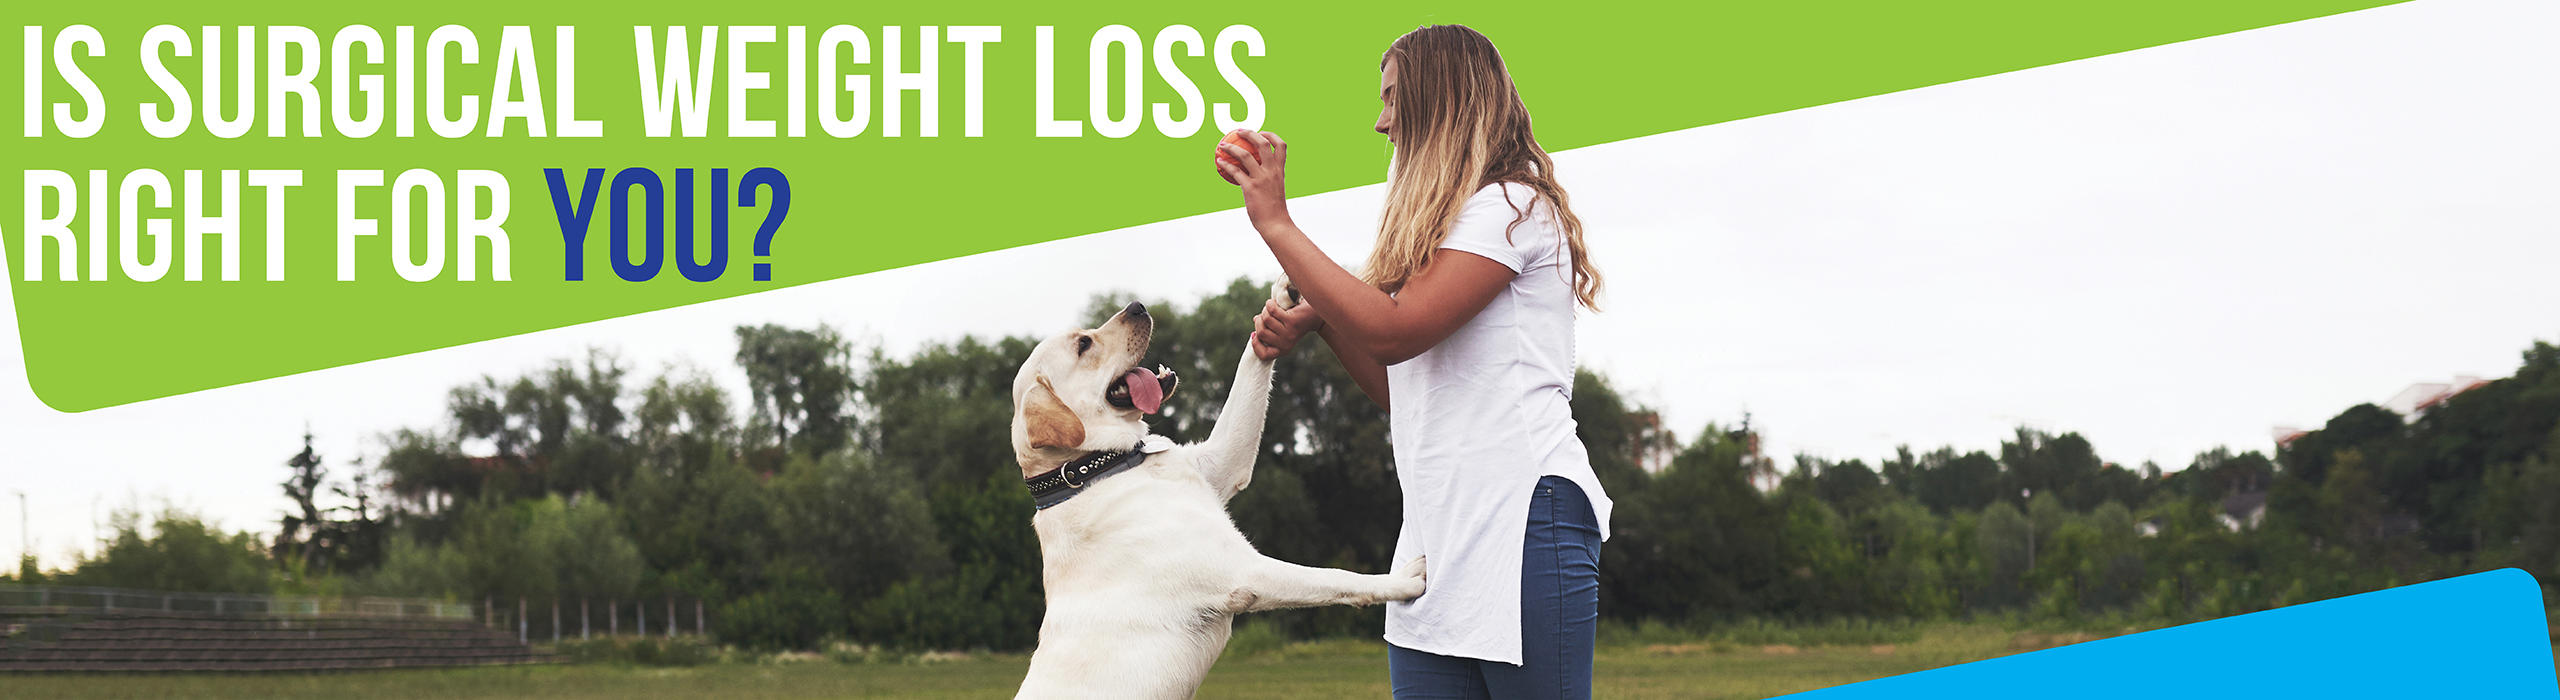 Photo of woman playing ball with dog

text reads: Is surgical weight loss right for you?